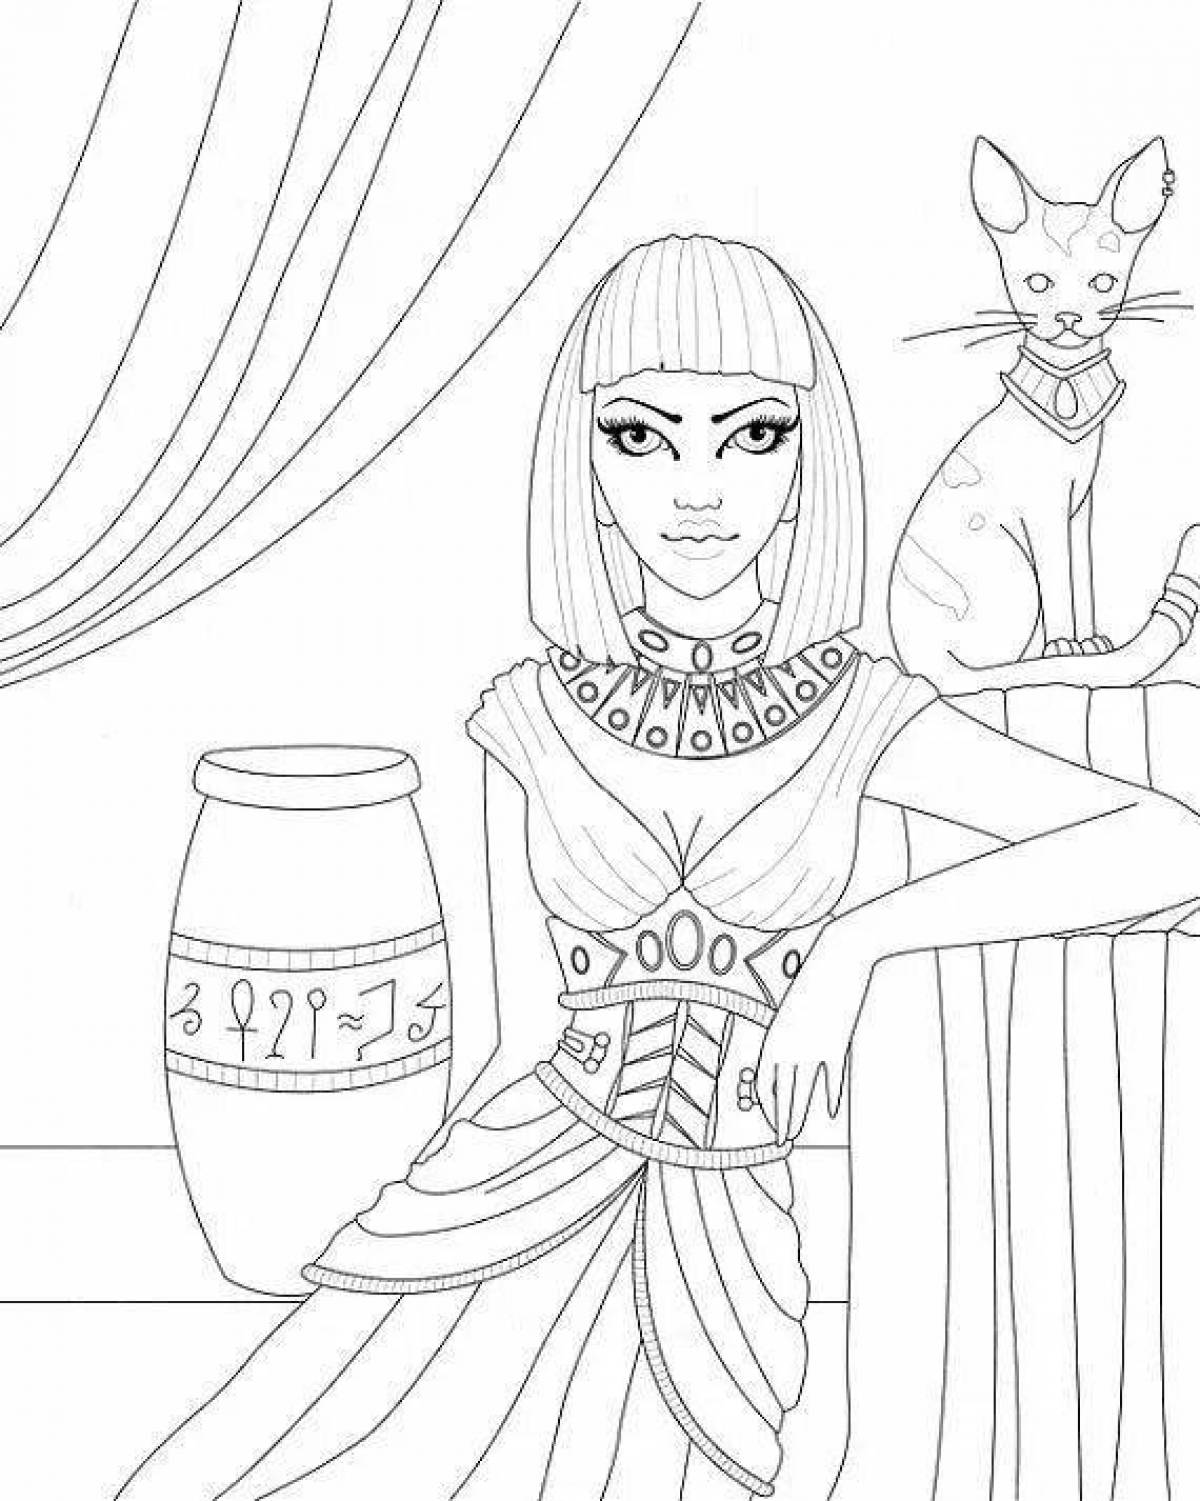 Cleopatra glowing coloring book